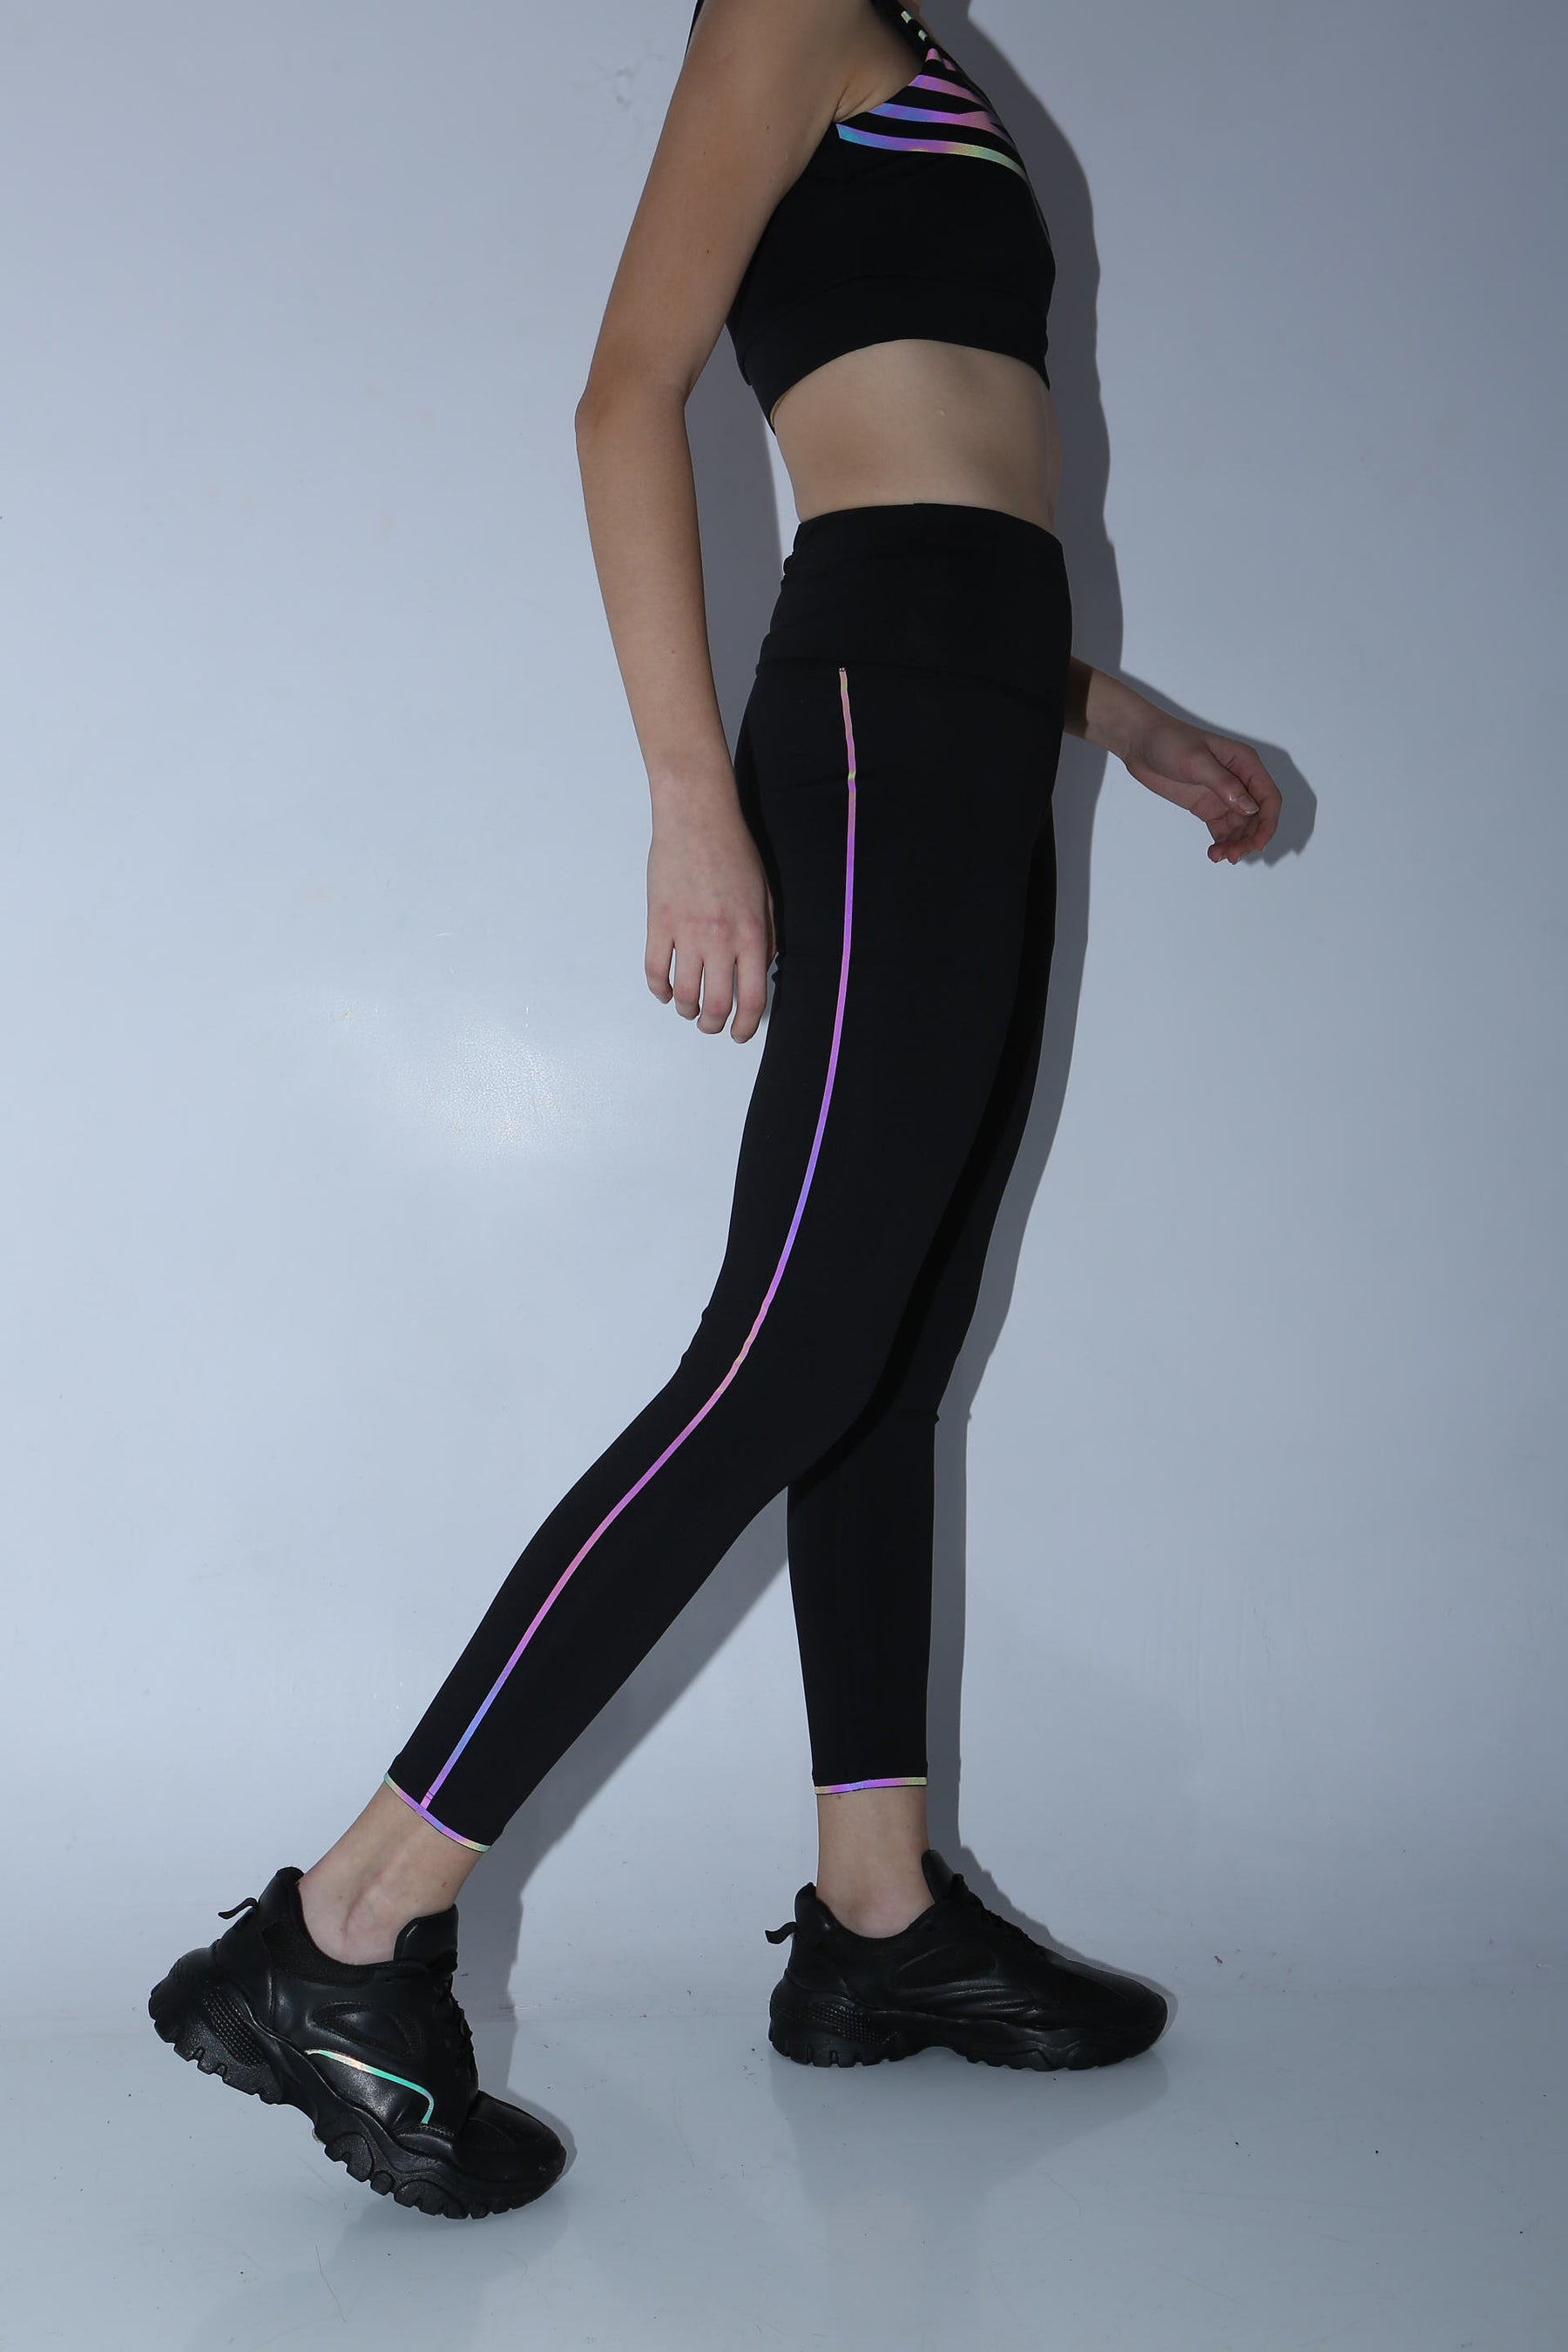 Silvertraq - An Active Wear you never knew you needed. The Flex